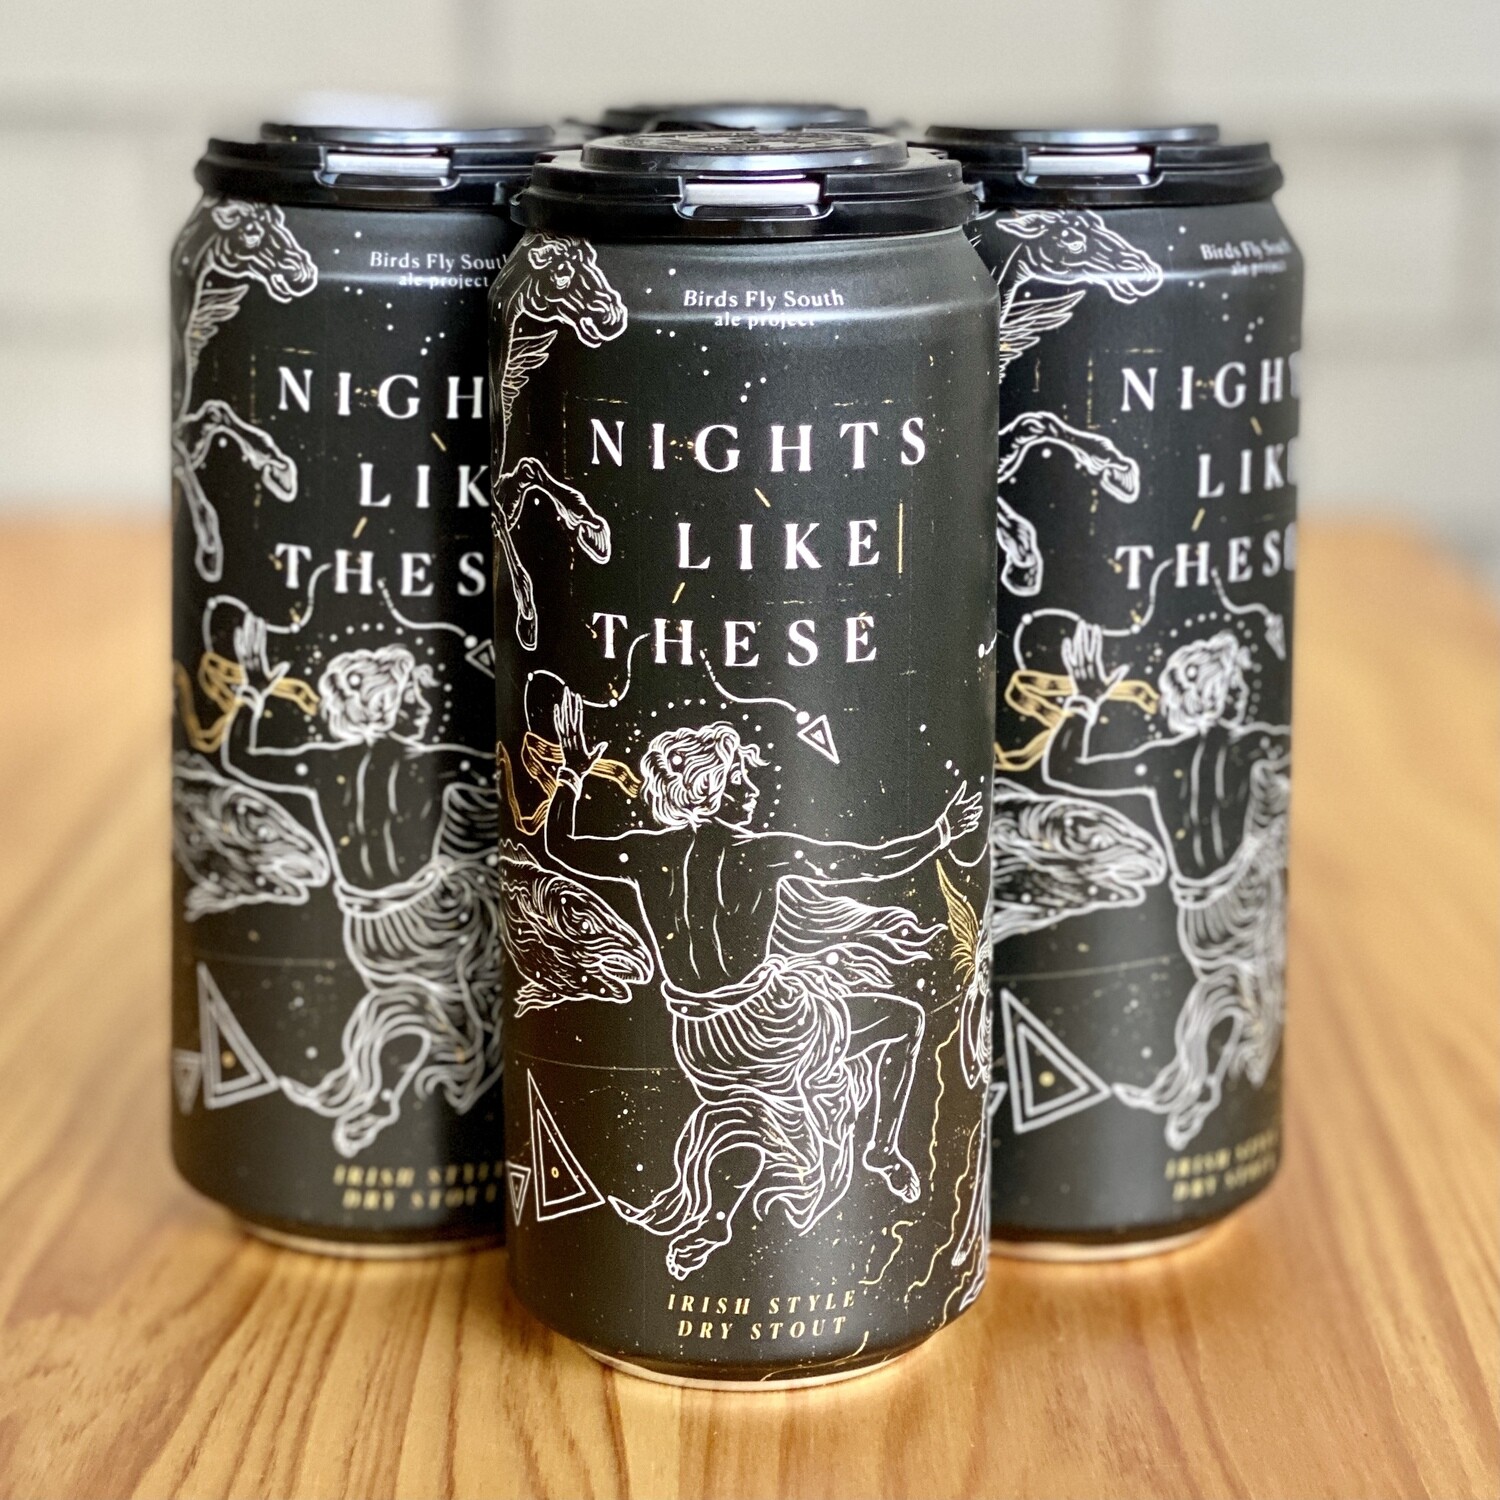 Birds Fly South Nights Like These (4pk)